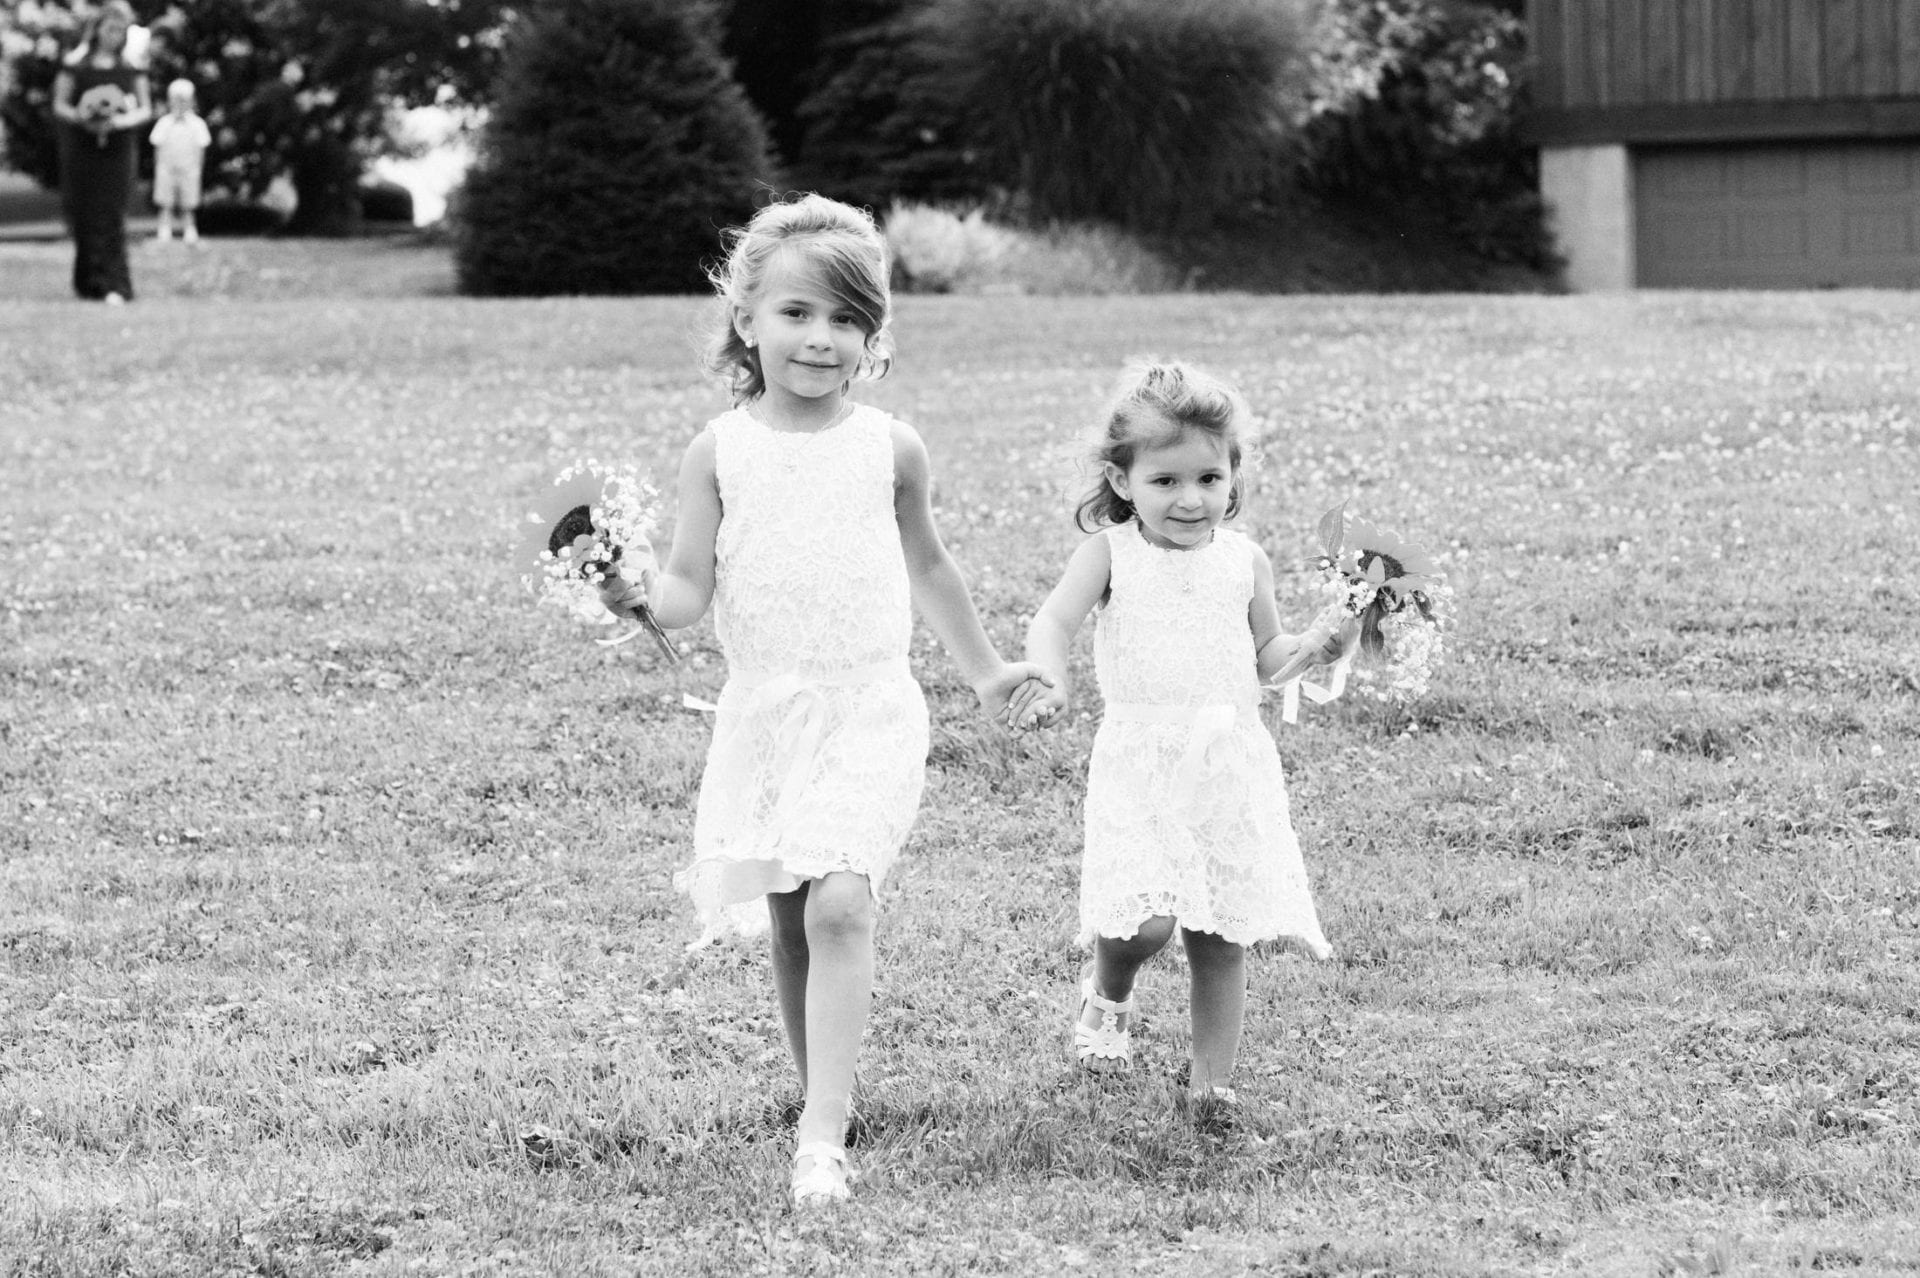 Two young girls wearing white dresses and shoes walk down a hill while carrying flowers during an Armstrong Farms Wedding.